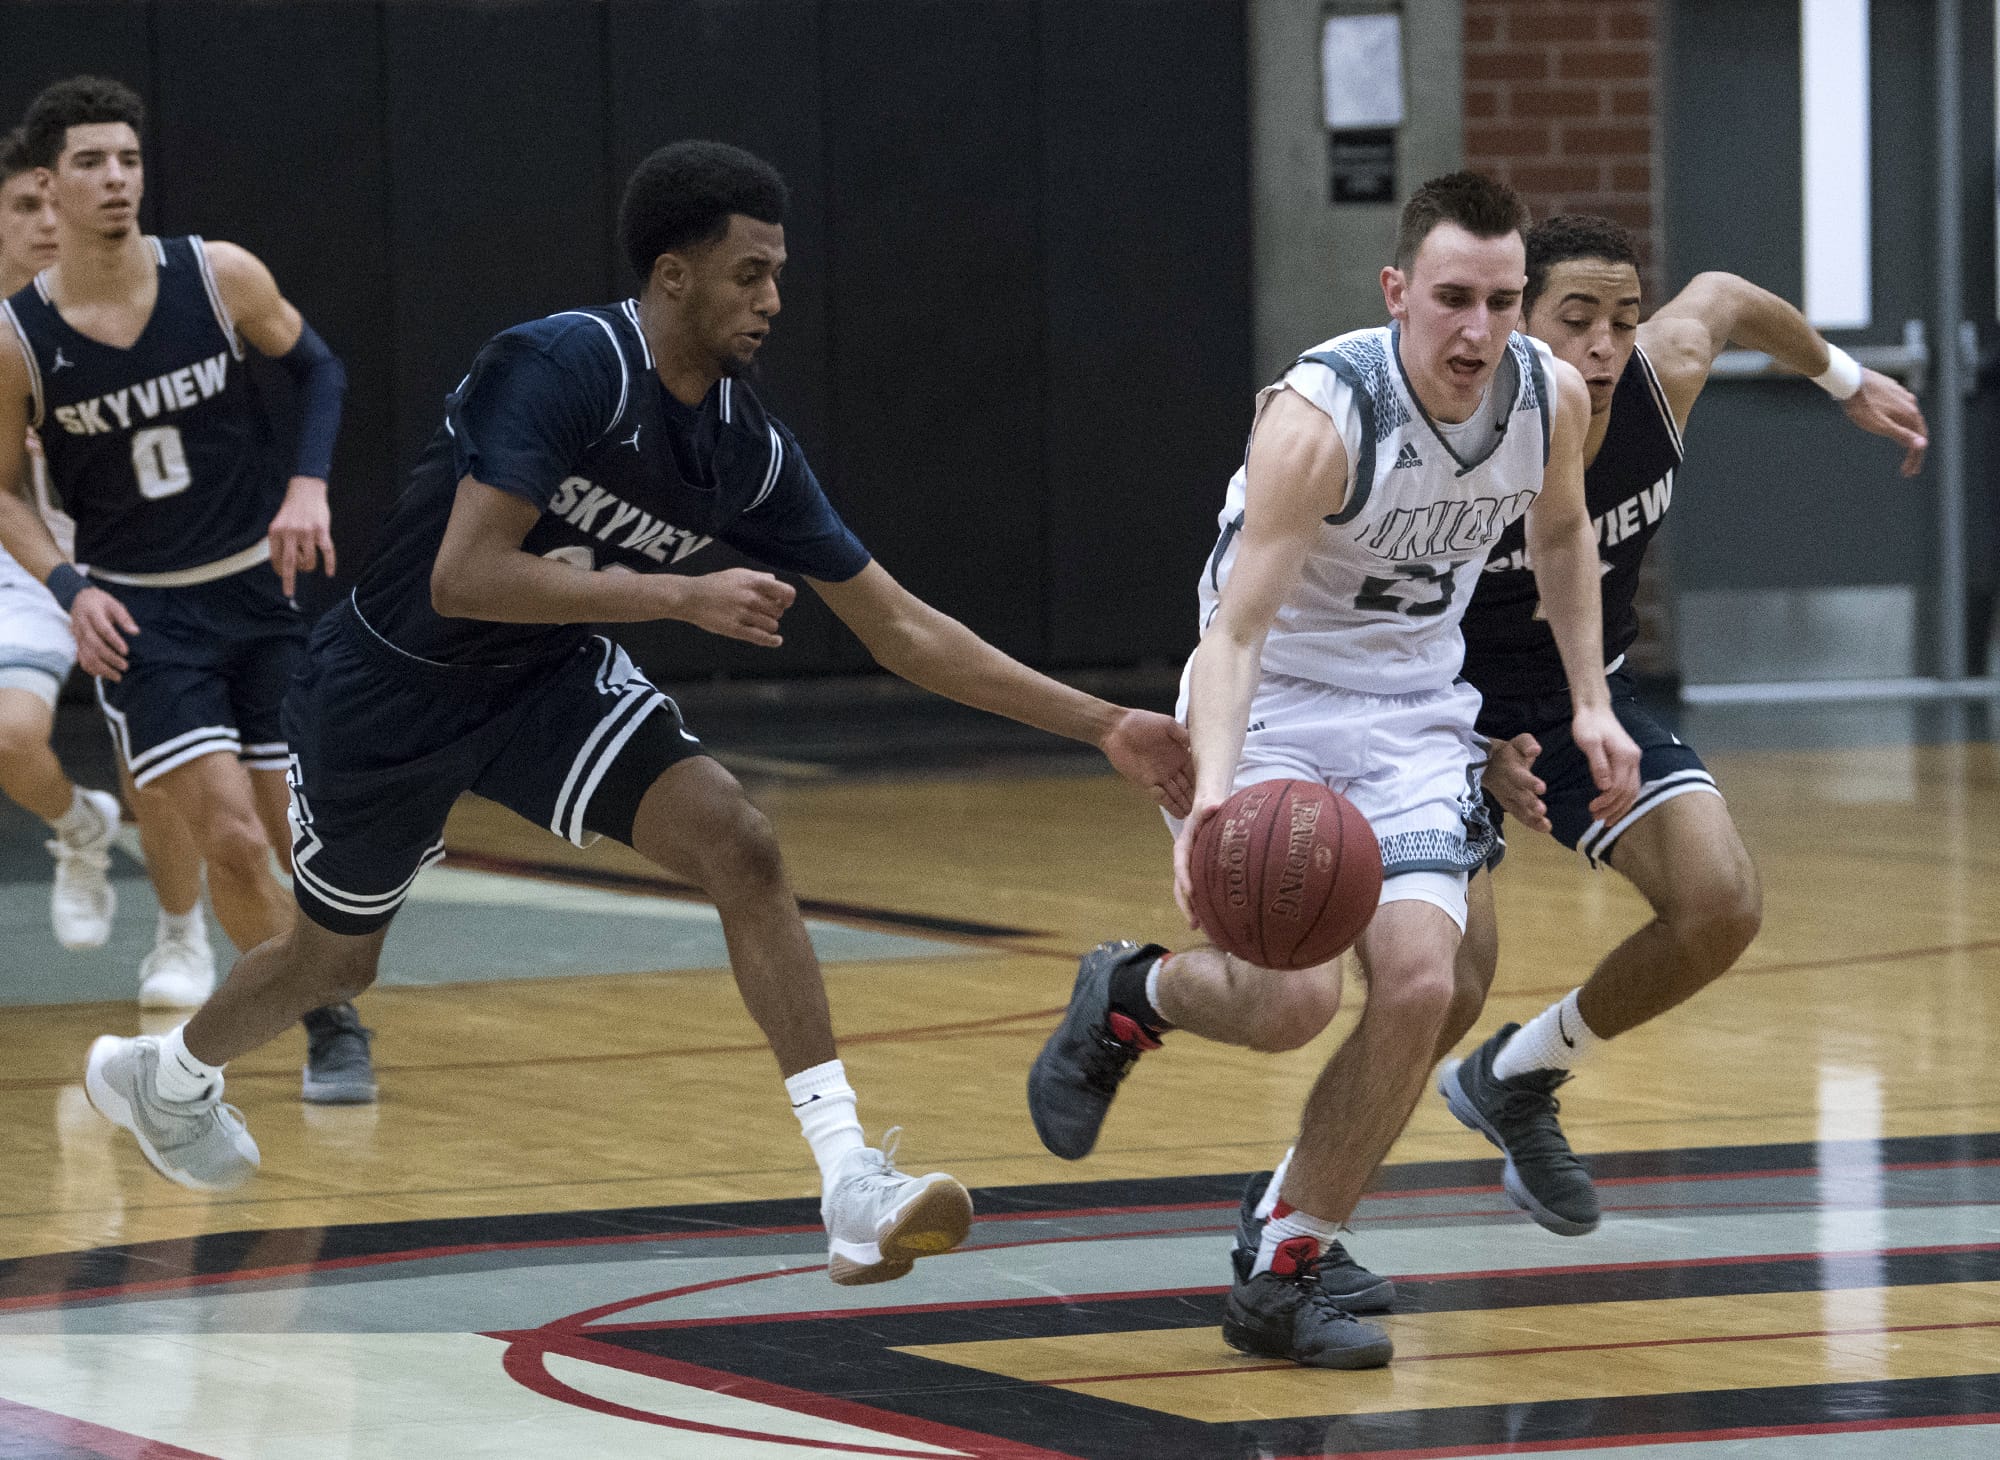 Skyview's KB Fesehazion (22) and Jovon Sewelll (2) sprint after Union's Ethan Smith as he dribbles down court with second left in Tuesday night's game at Union High School on Jan. 23, 2018.